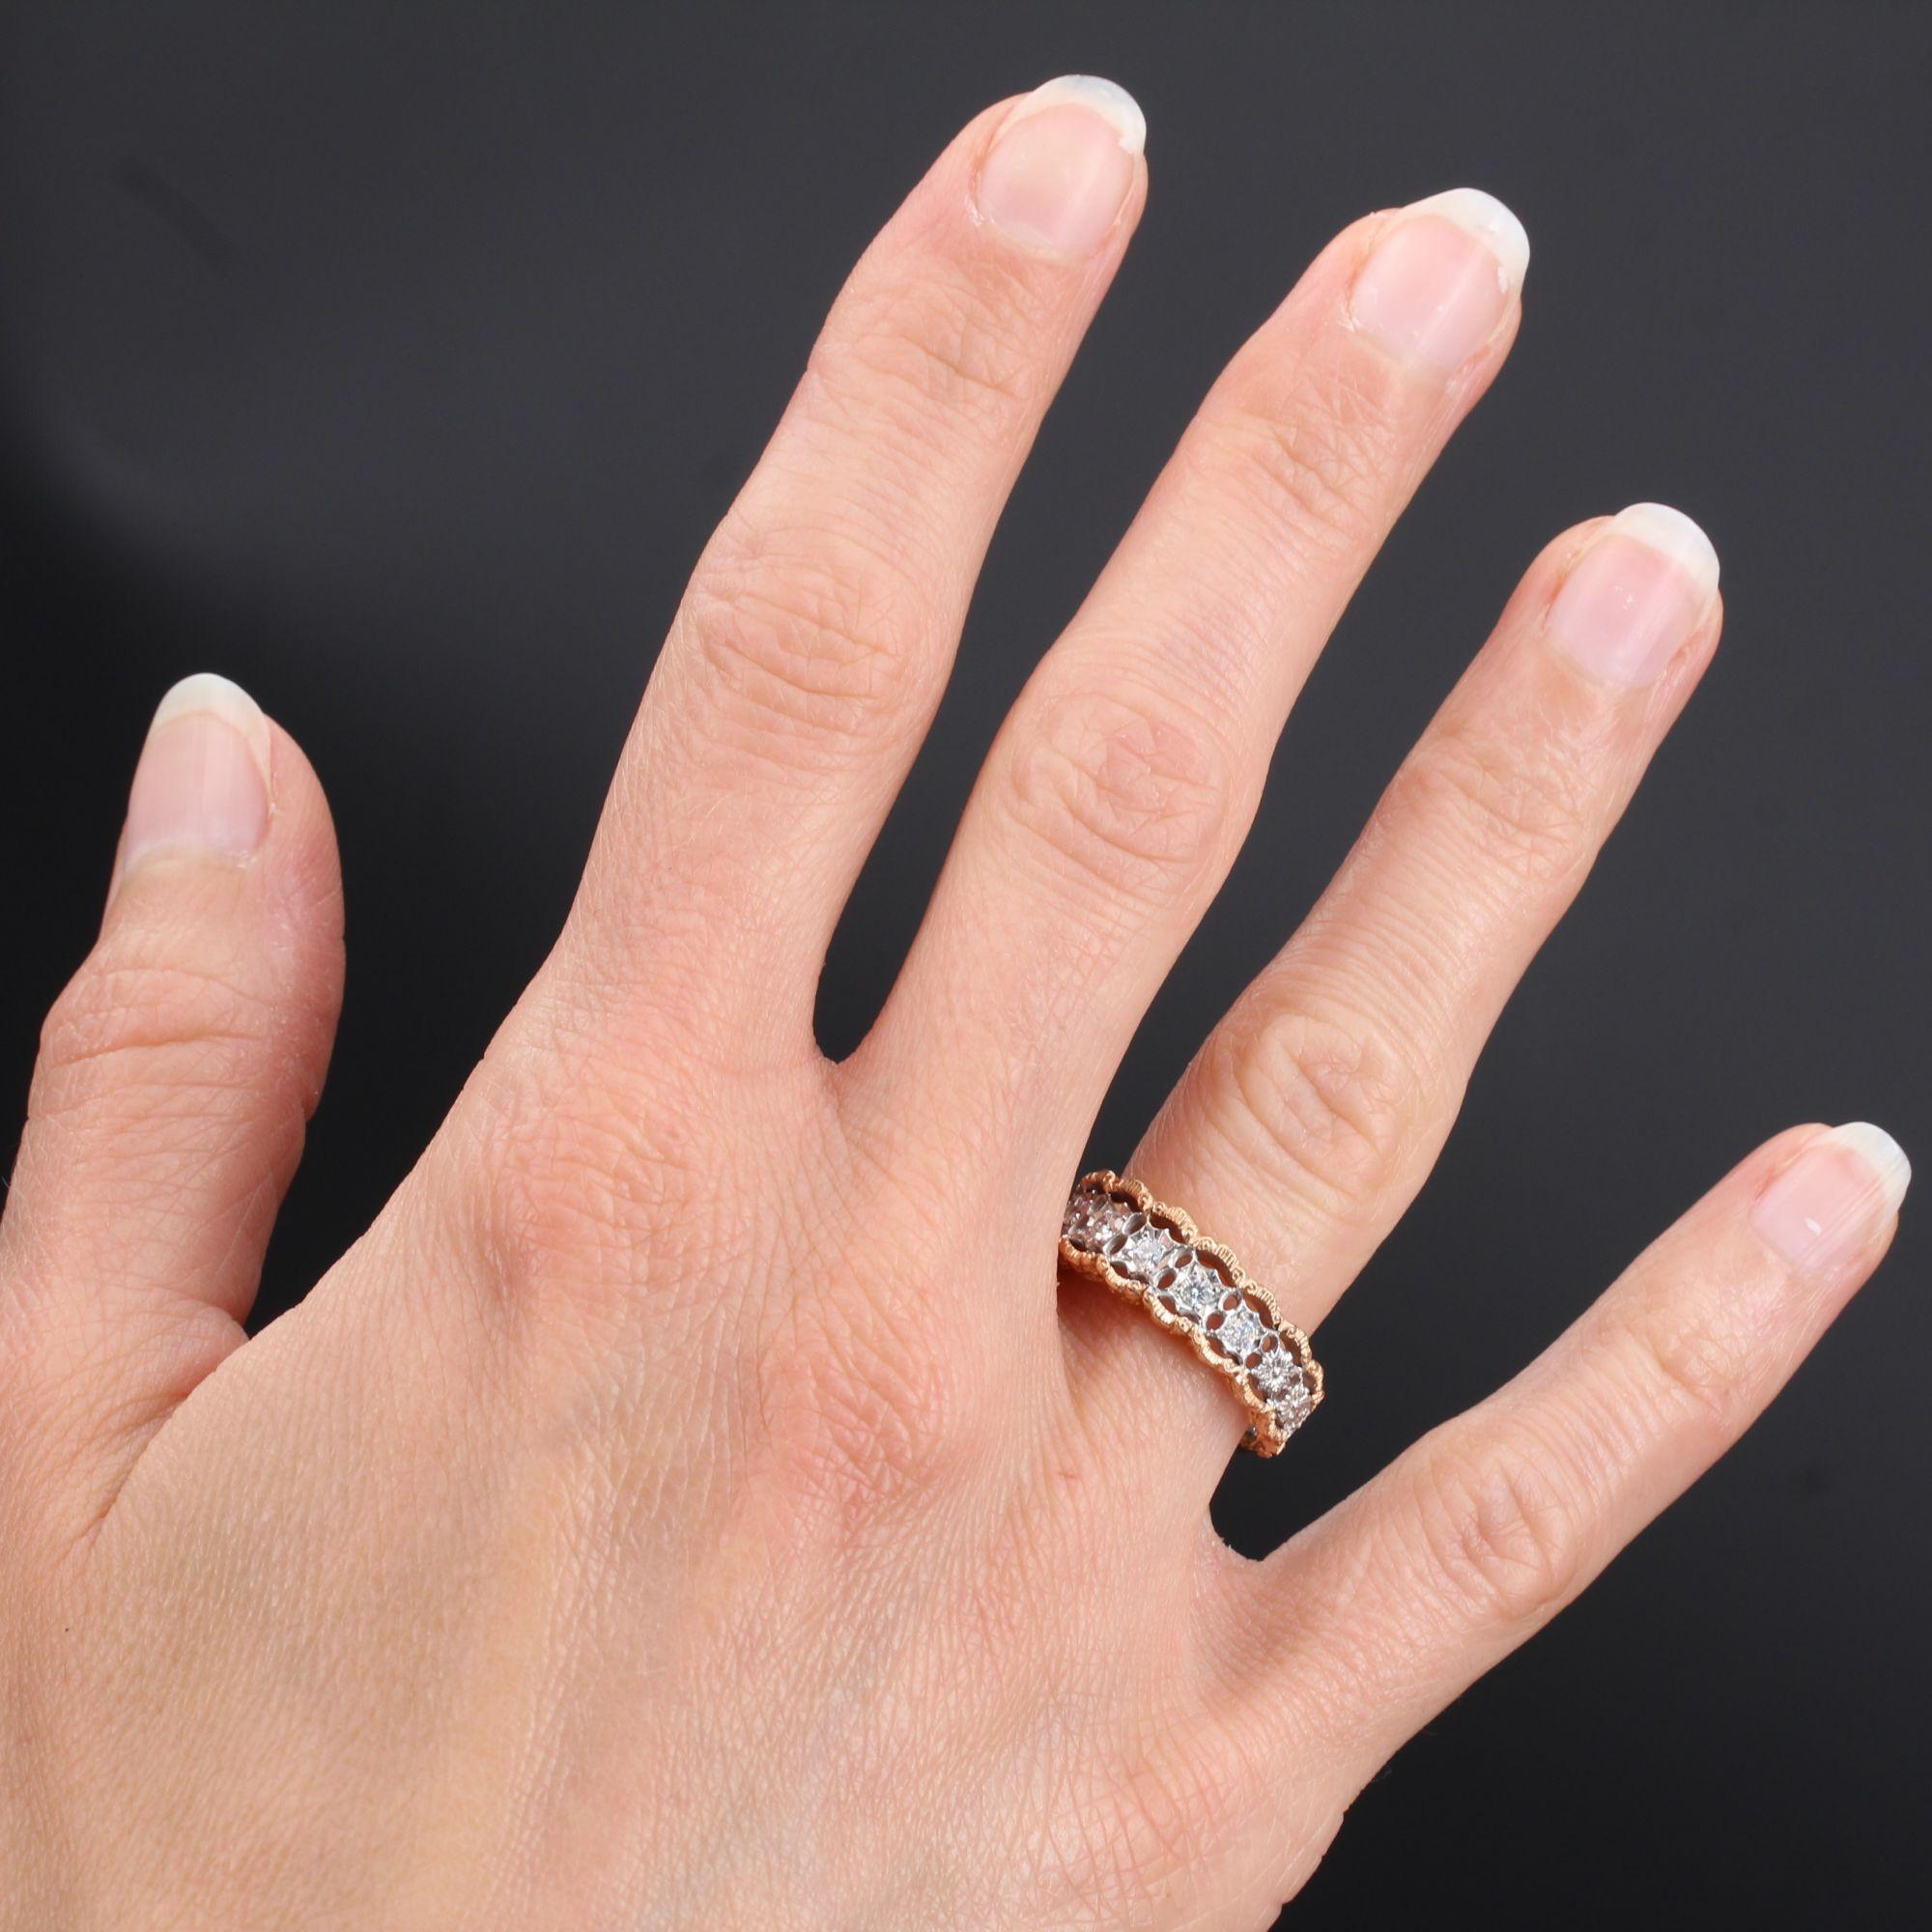 Ring in 18 karat rose and white gold.
This ravishing diamond ring features delicate white gold filigree work set with seven brilliant- cut diamonds edged with rose gold filigree. A delightful ring that would make an elegant eternity ring. 
Total